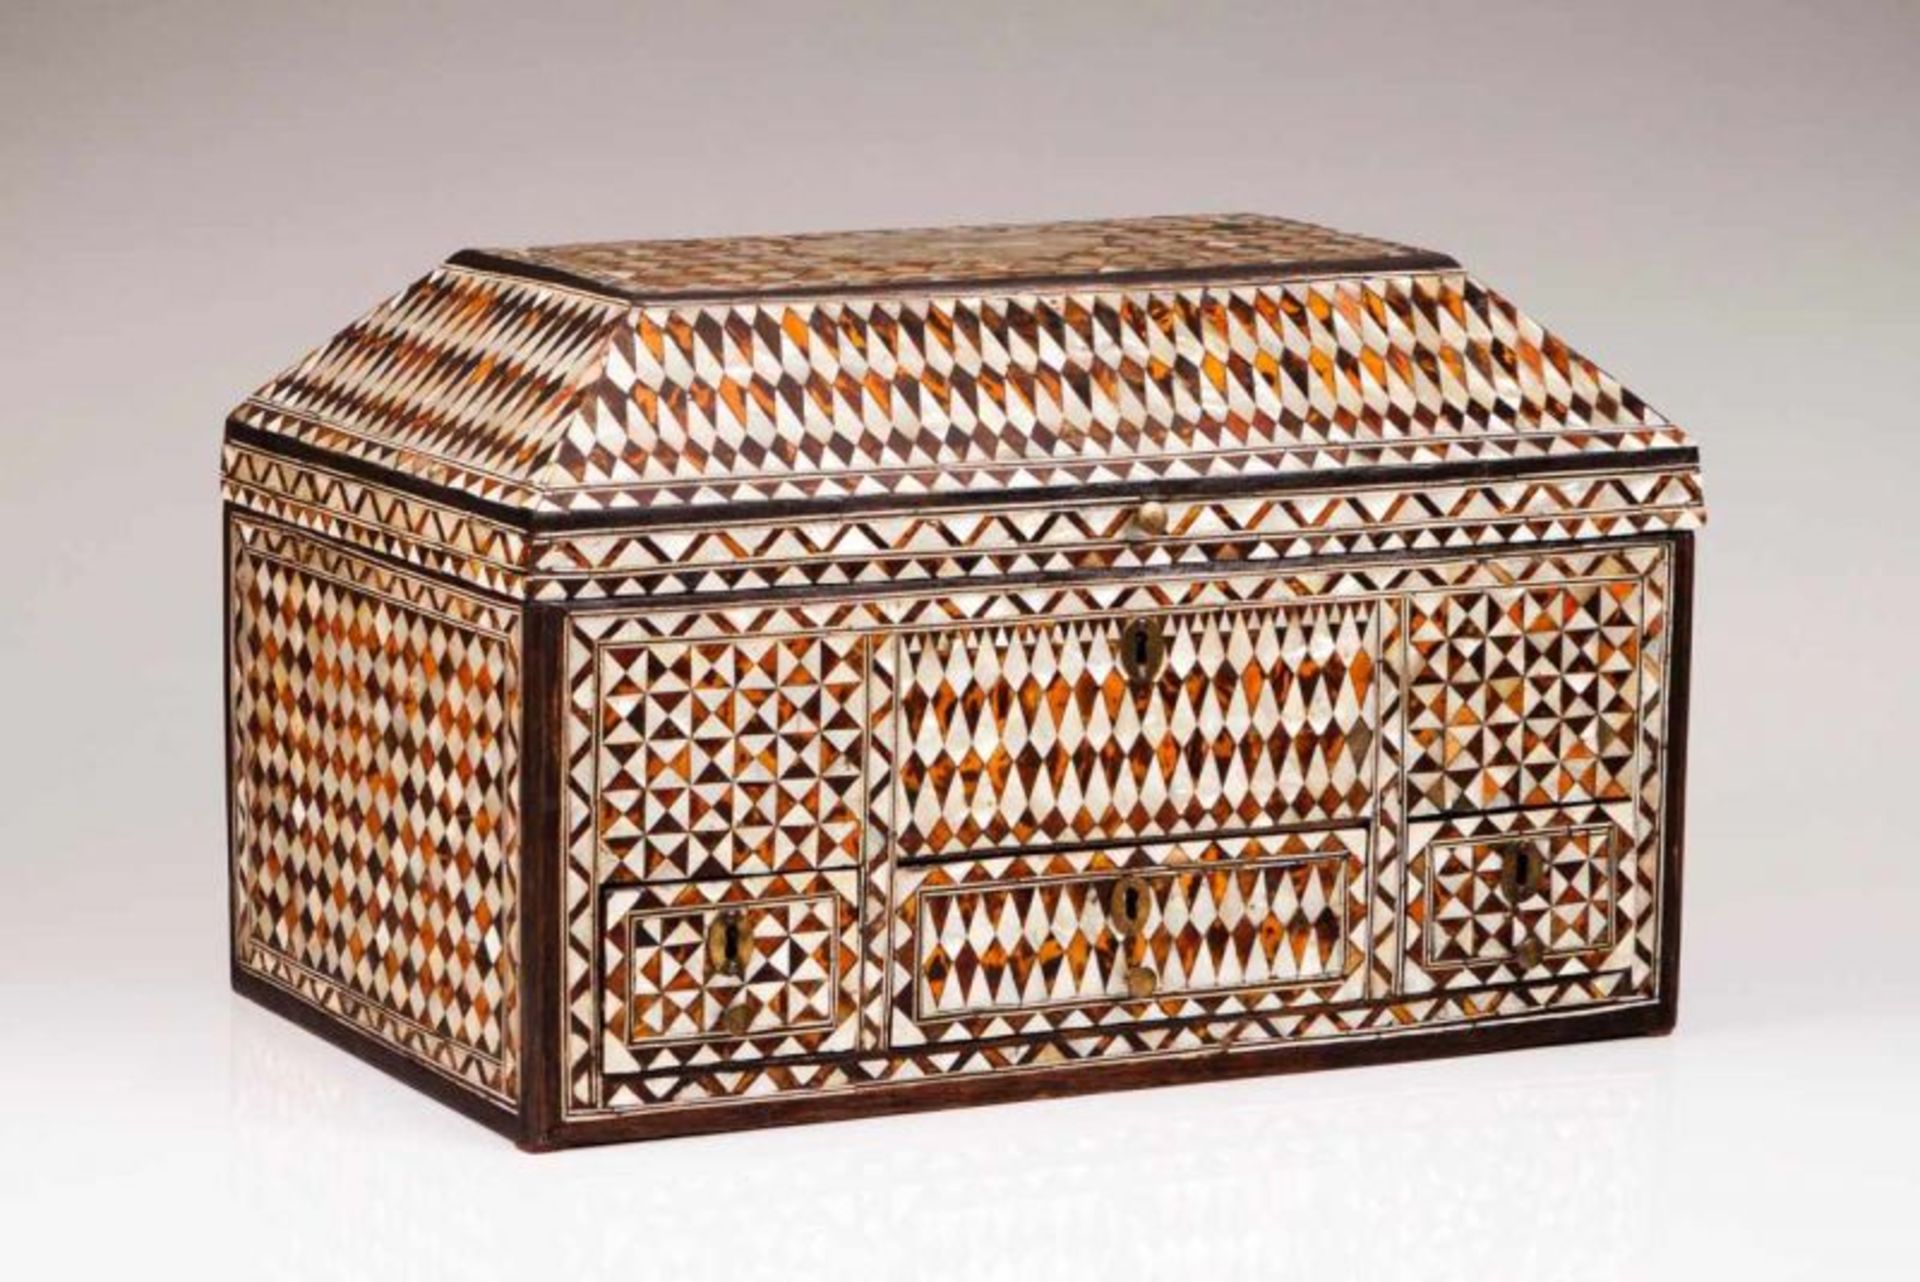 A marriage chest Wood with mother-of-pearl and tortoiseshell marquetry decoration forming geometric